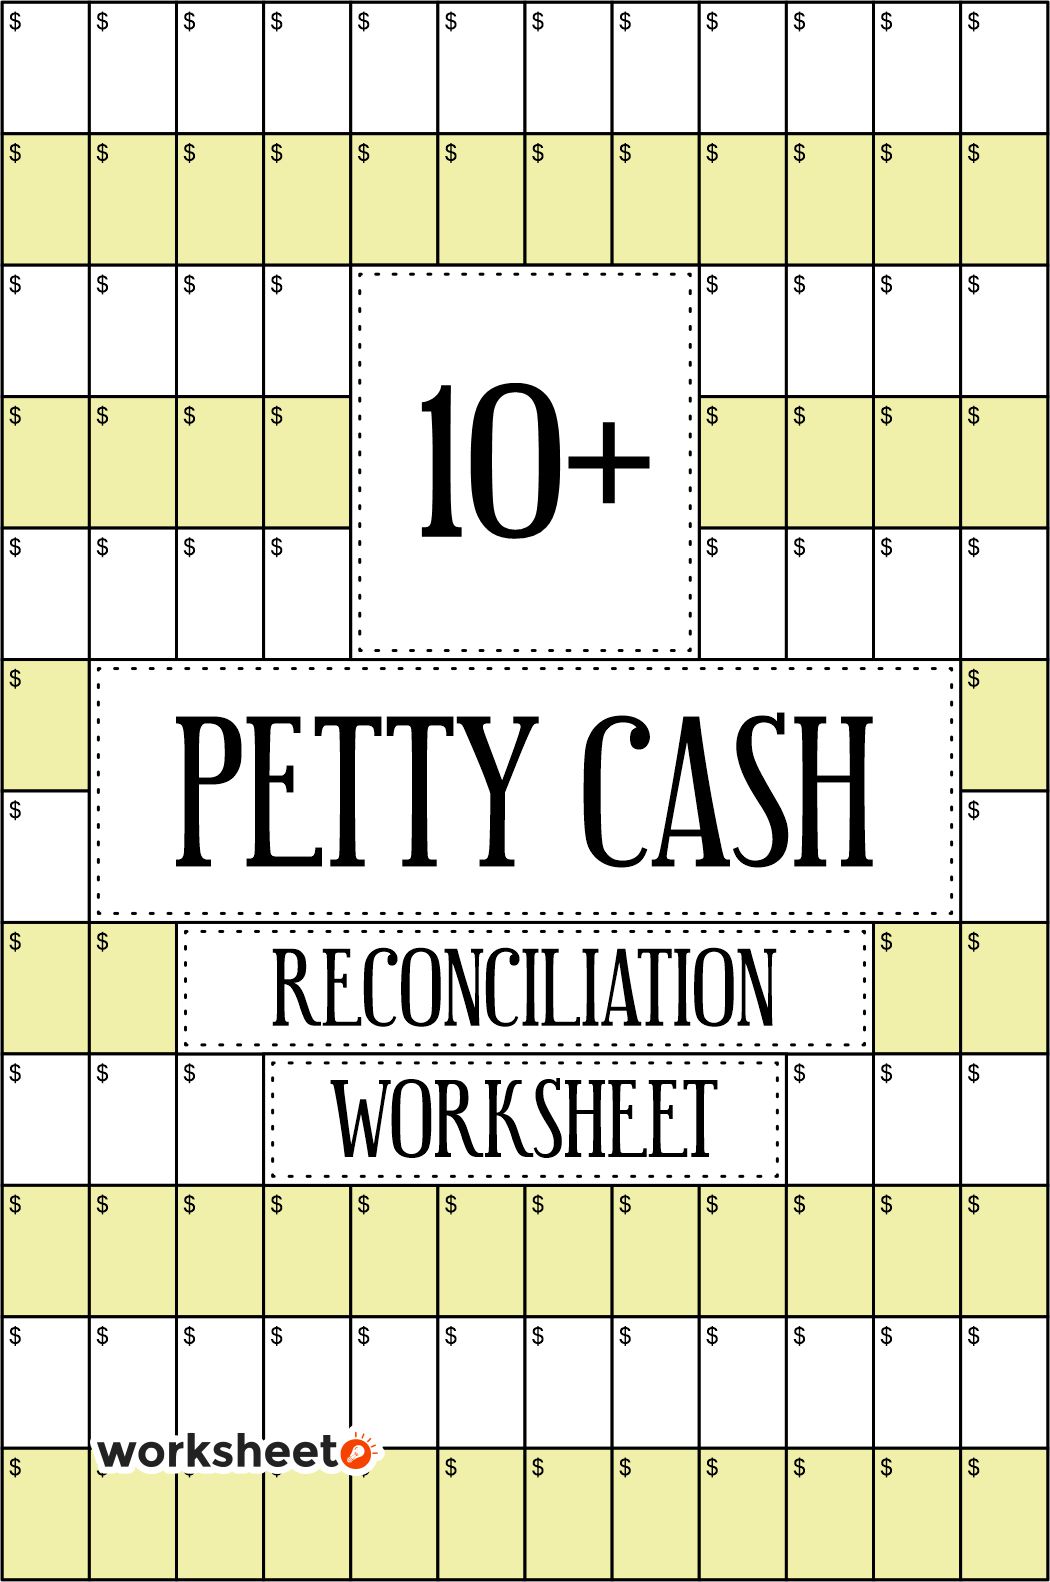 15 Images of Petty Cash Reconciliation Worksheet